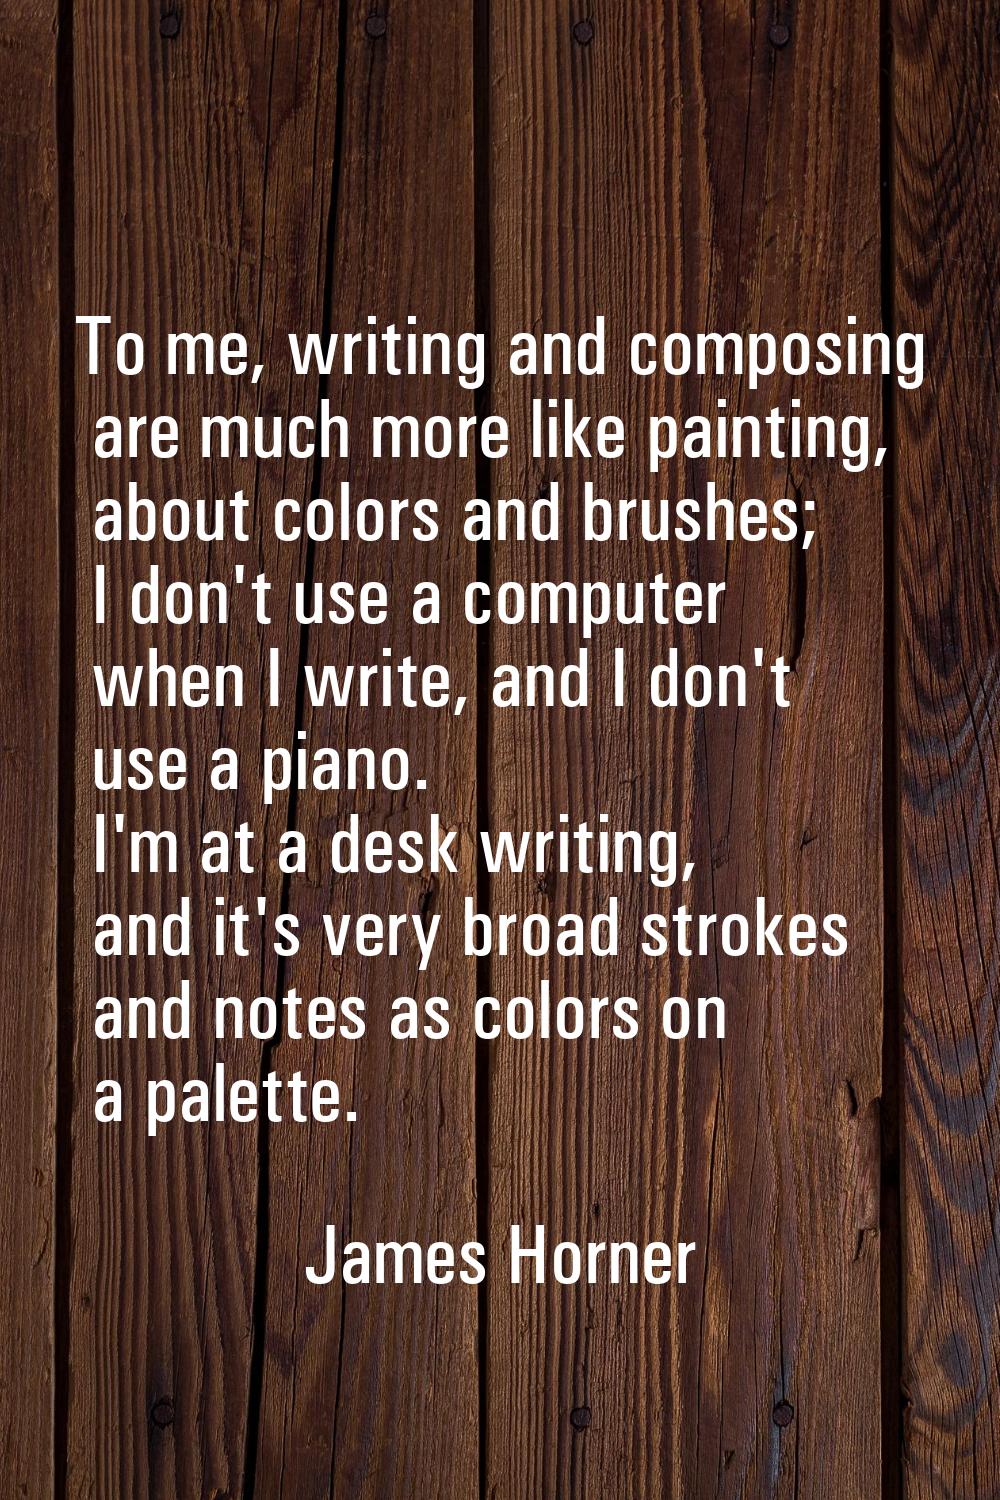 To me, writing and composing are much more like painting, about colors and brushes; I don't use a c